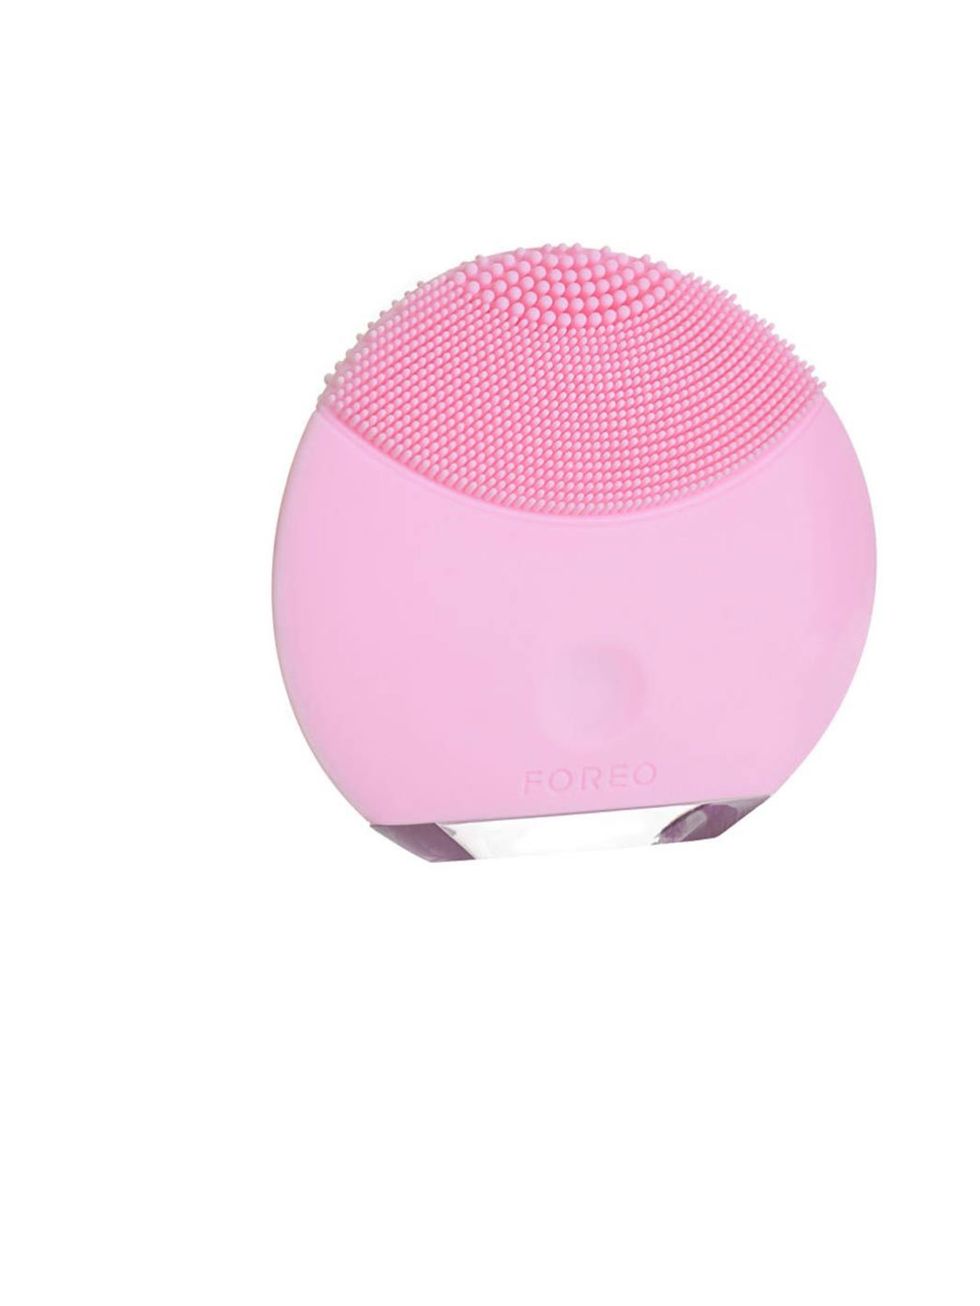 <p><strong><a href="http://www.theukedit.com/foreo-luna-mini-petal-pink/10848250.html">Foreo Luna Mini in Petal Pink, £99</a></strong></p><p>Sophie Beresiner, Beauty Director</p><p>I always insist that the secret to perfect skin is proper cleansing, so t